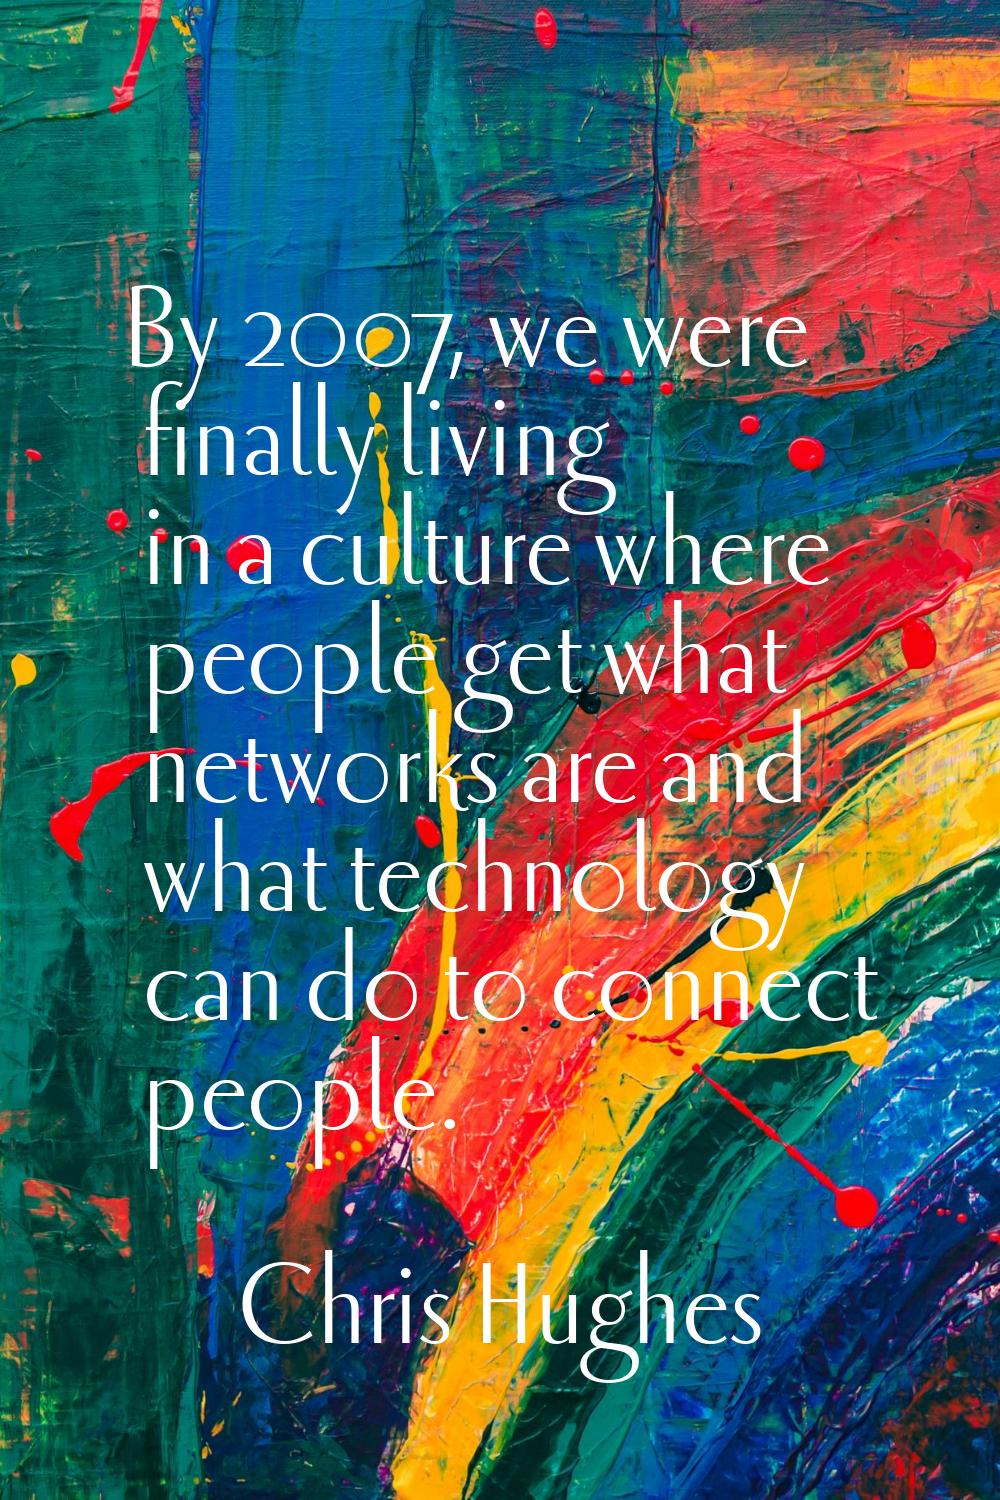 By 2007, we were finally living in a culture where people get what networks are and what technology